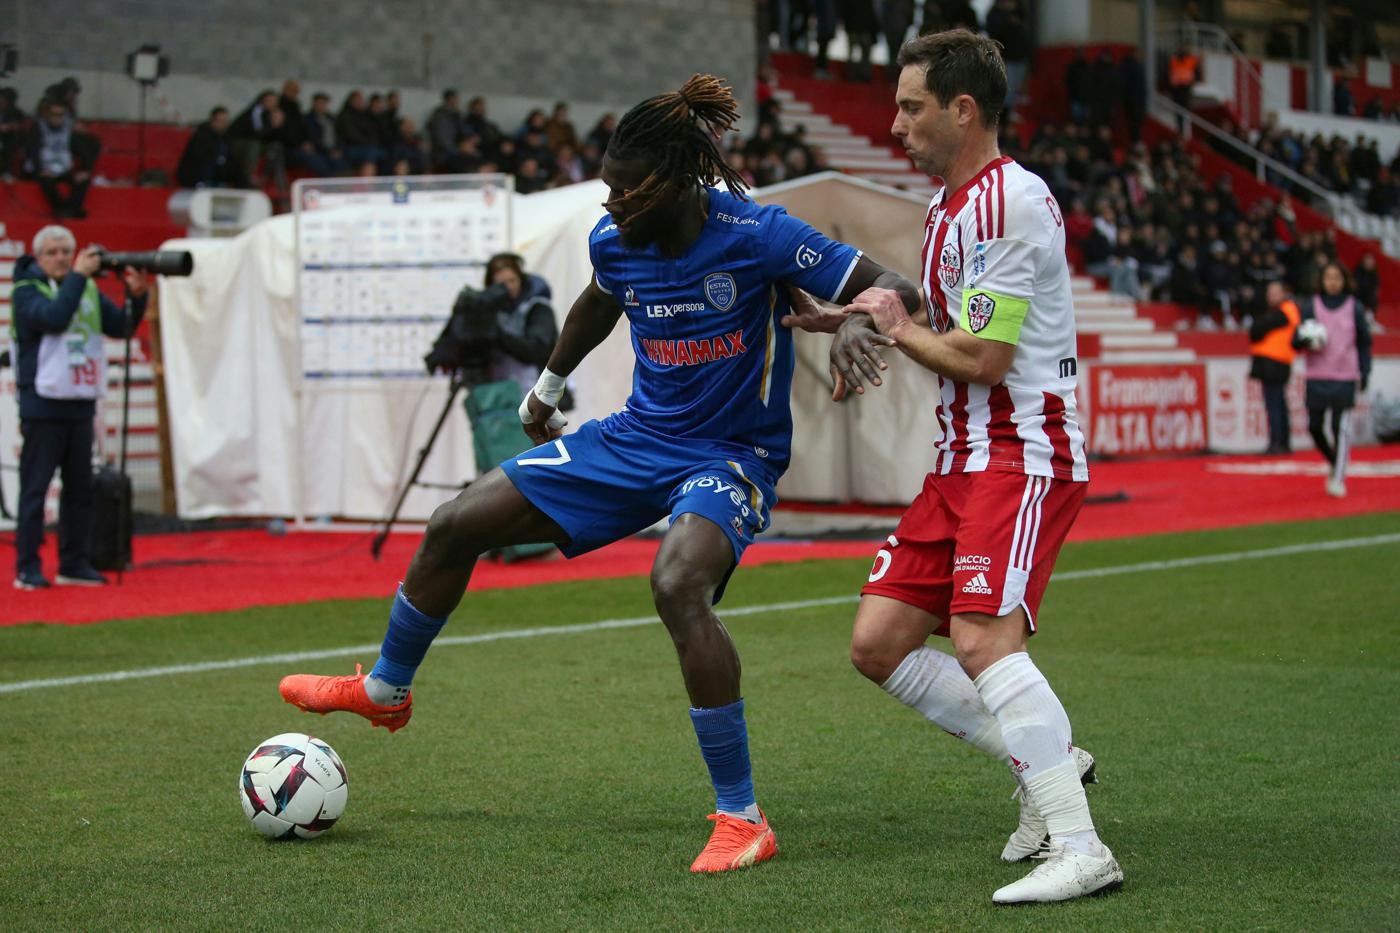 Ajaccio - Troyes - 2:1. French Championship, 25th round. Match review, statistics.